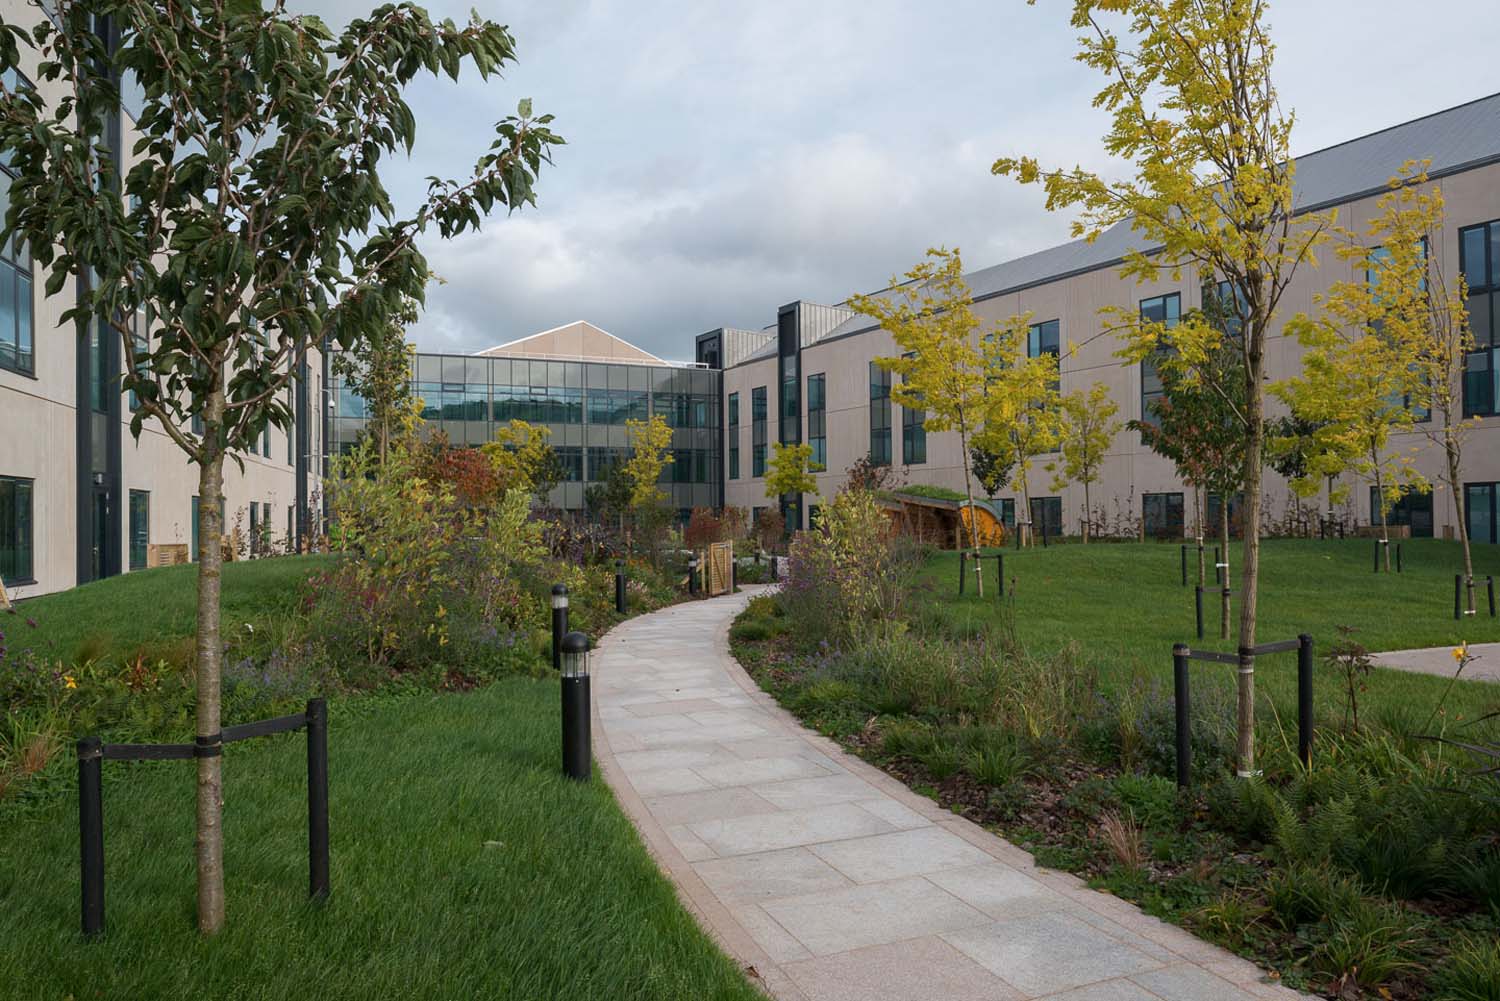 A path leading through a newly planted garden between light coloured stone buildings